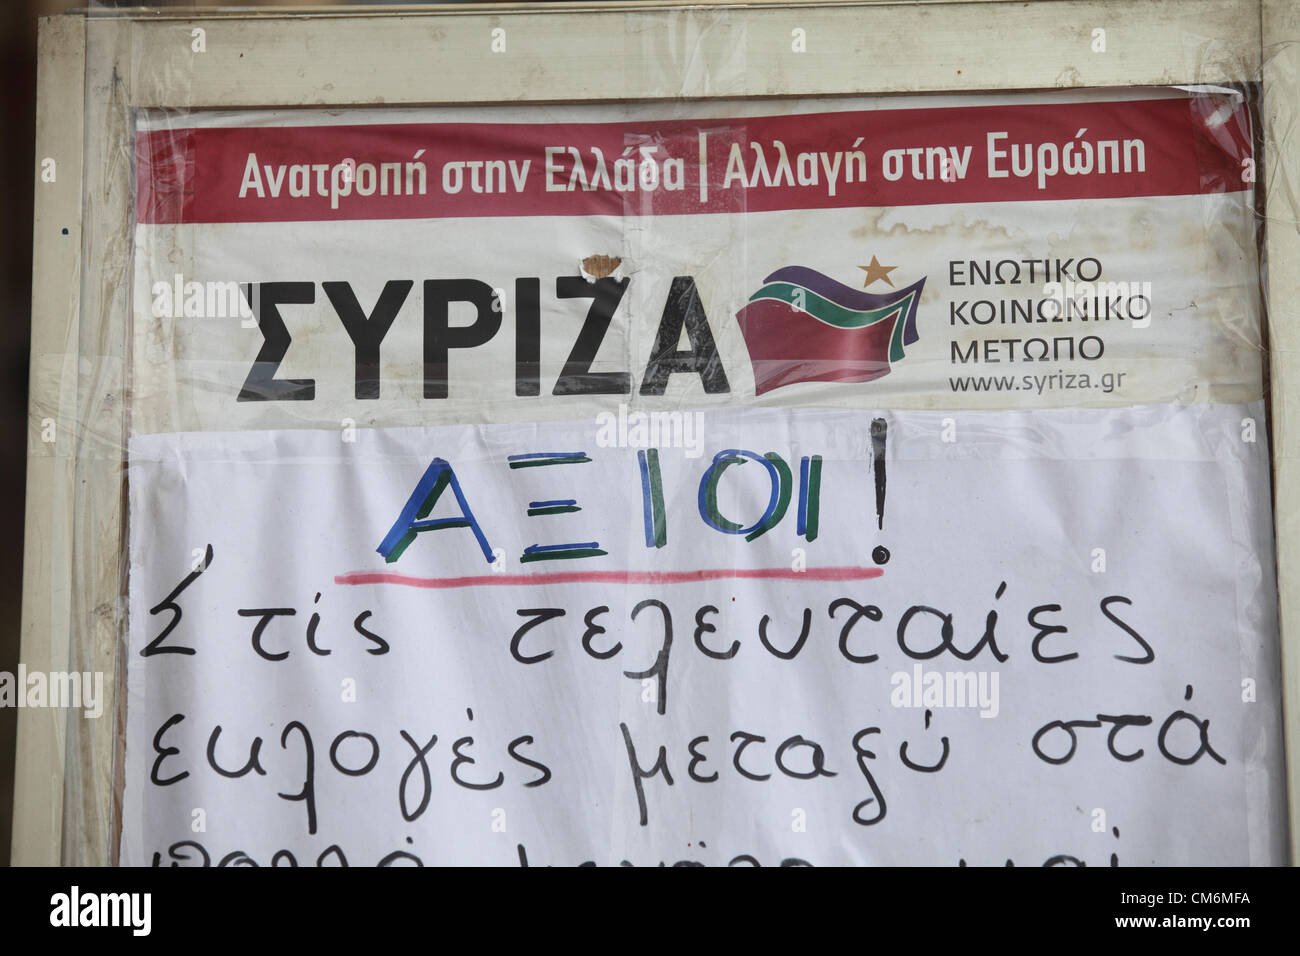 Aegina, Saronic Gulf, Greece, October 17, 2012: A Syritsa political party poster calls on the people of the island of Aegina, in the Saronic Gulf, to support tomorrow's (thurs) general strike against austerity and the Troika programme Stock Photo